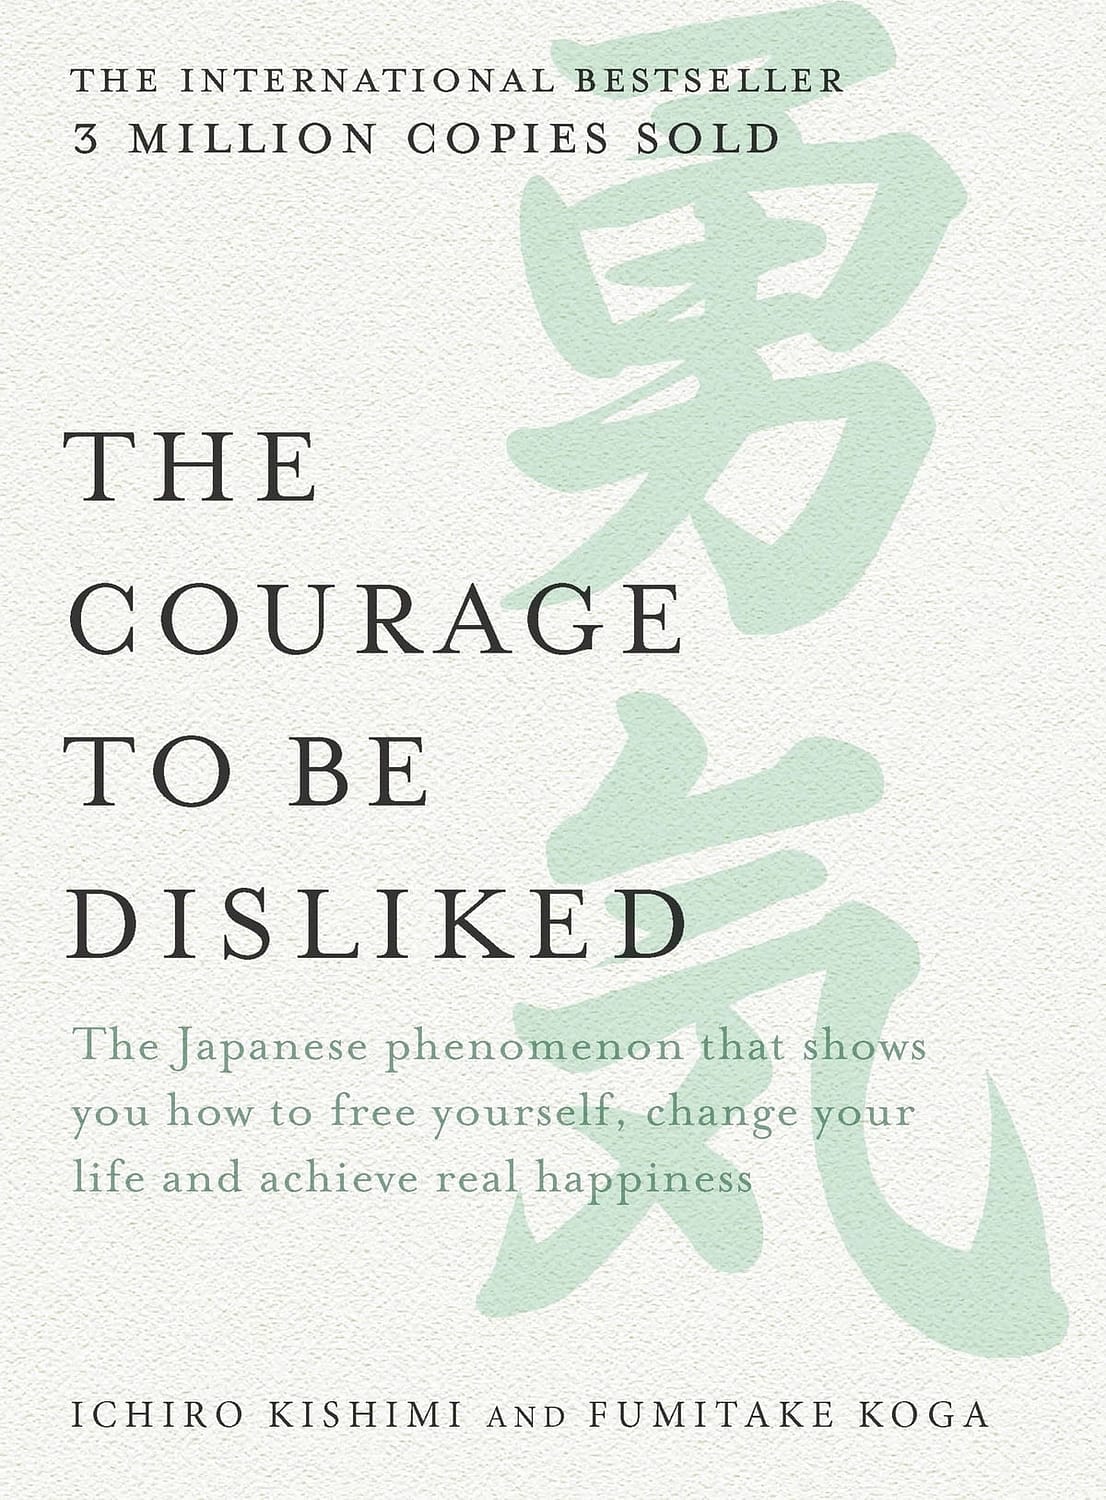 how to enjoy life - the courage to be disliked